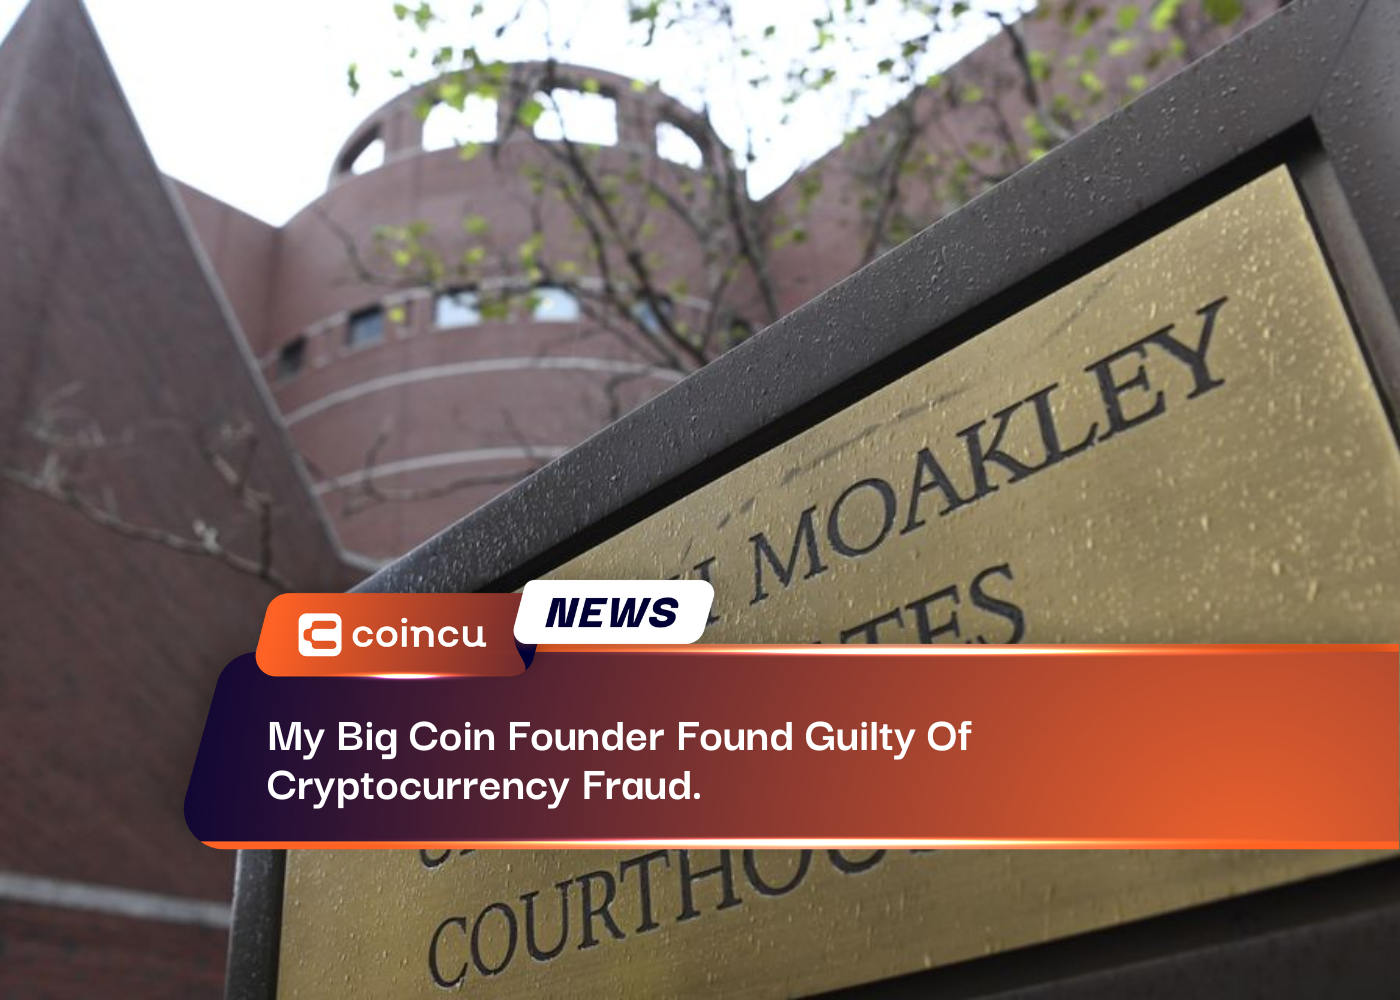 My Big Coin Founder Found Guilty Of Cryptocurrency Fraud.